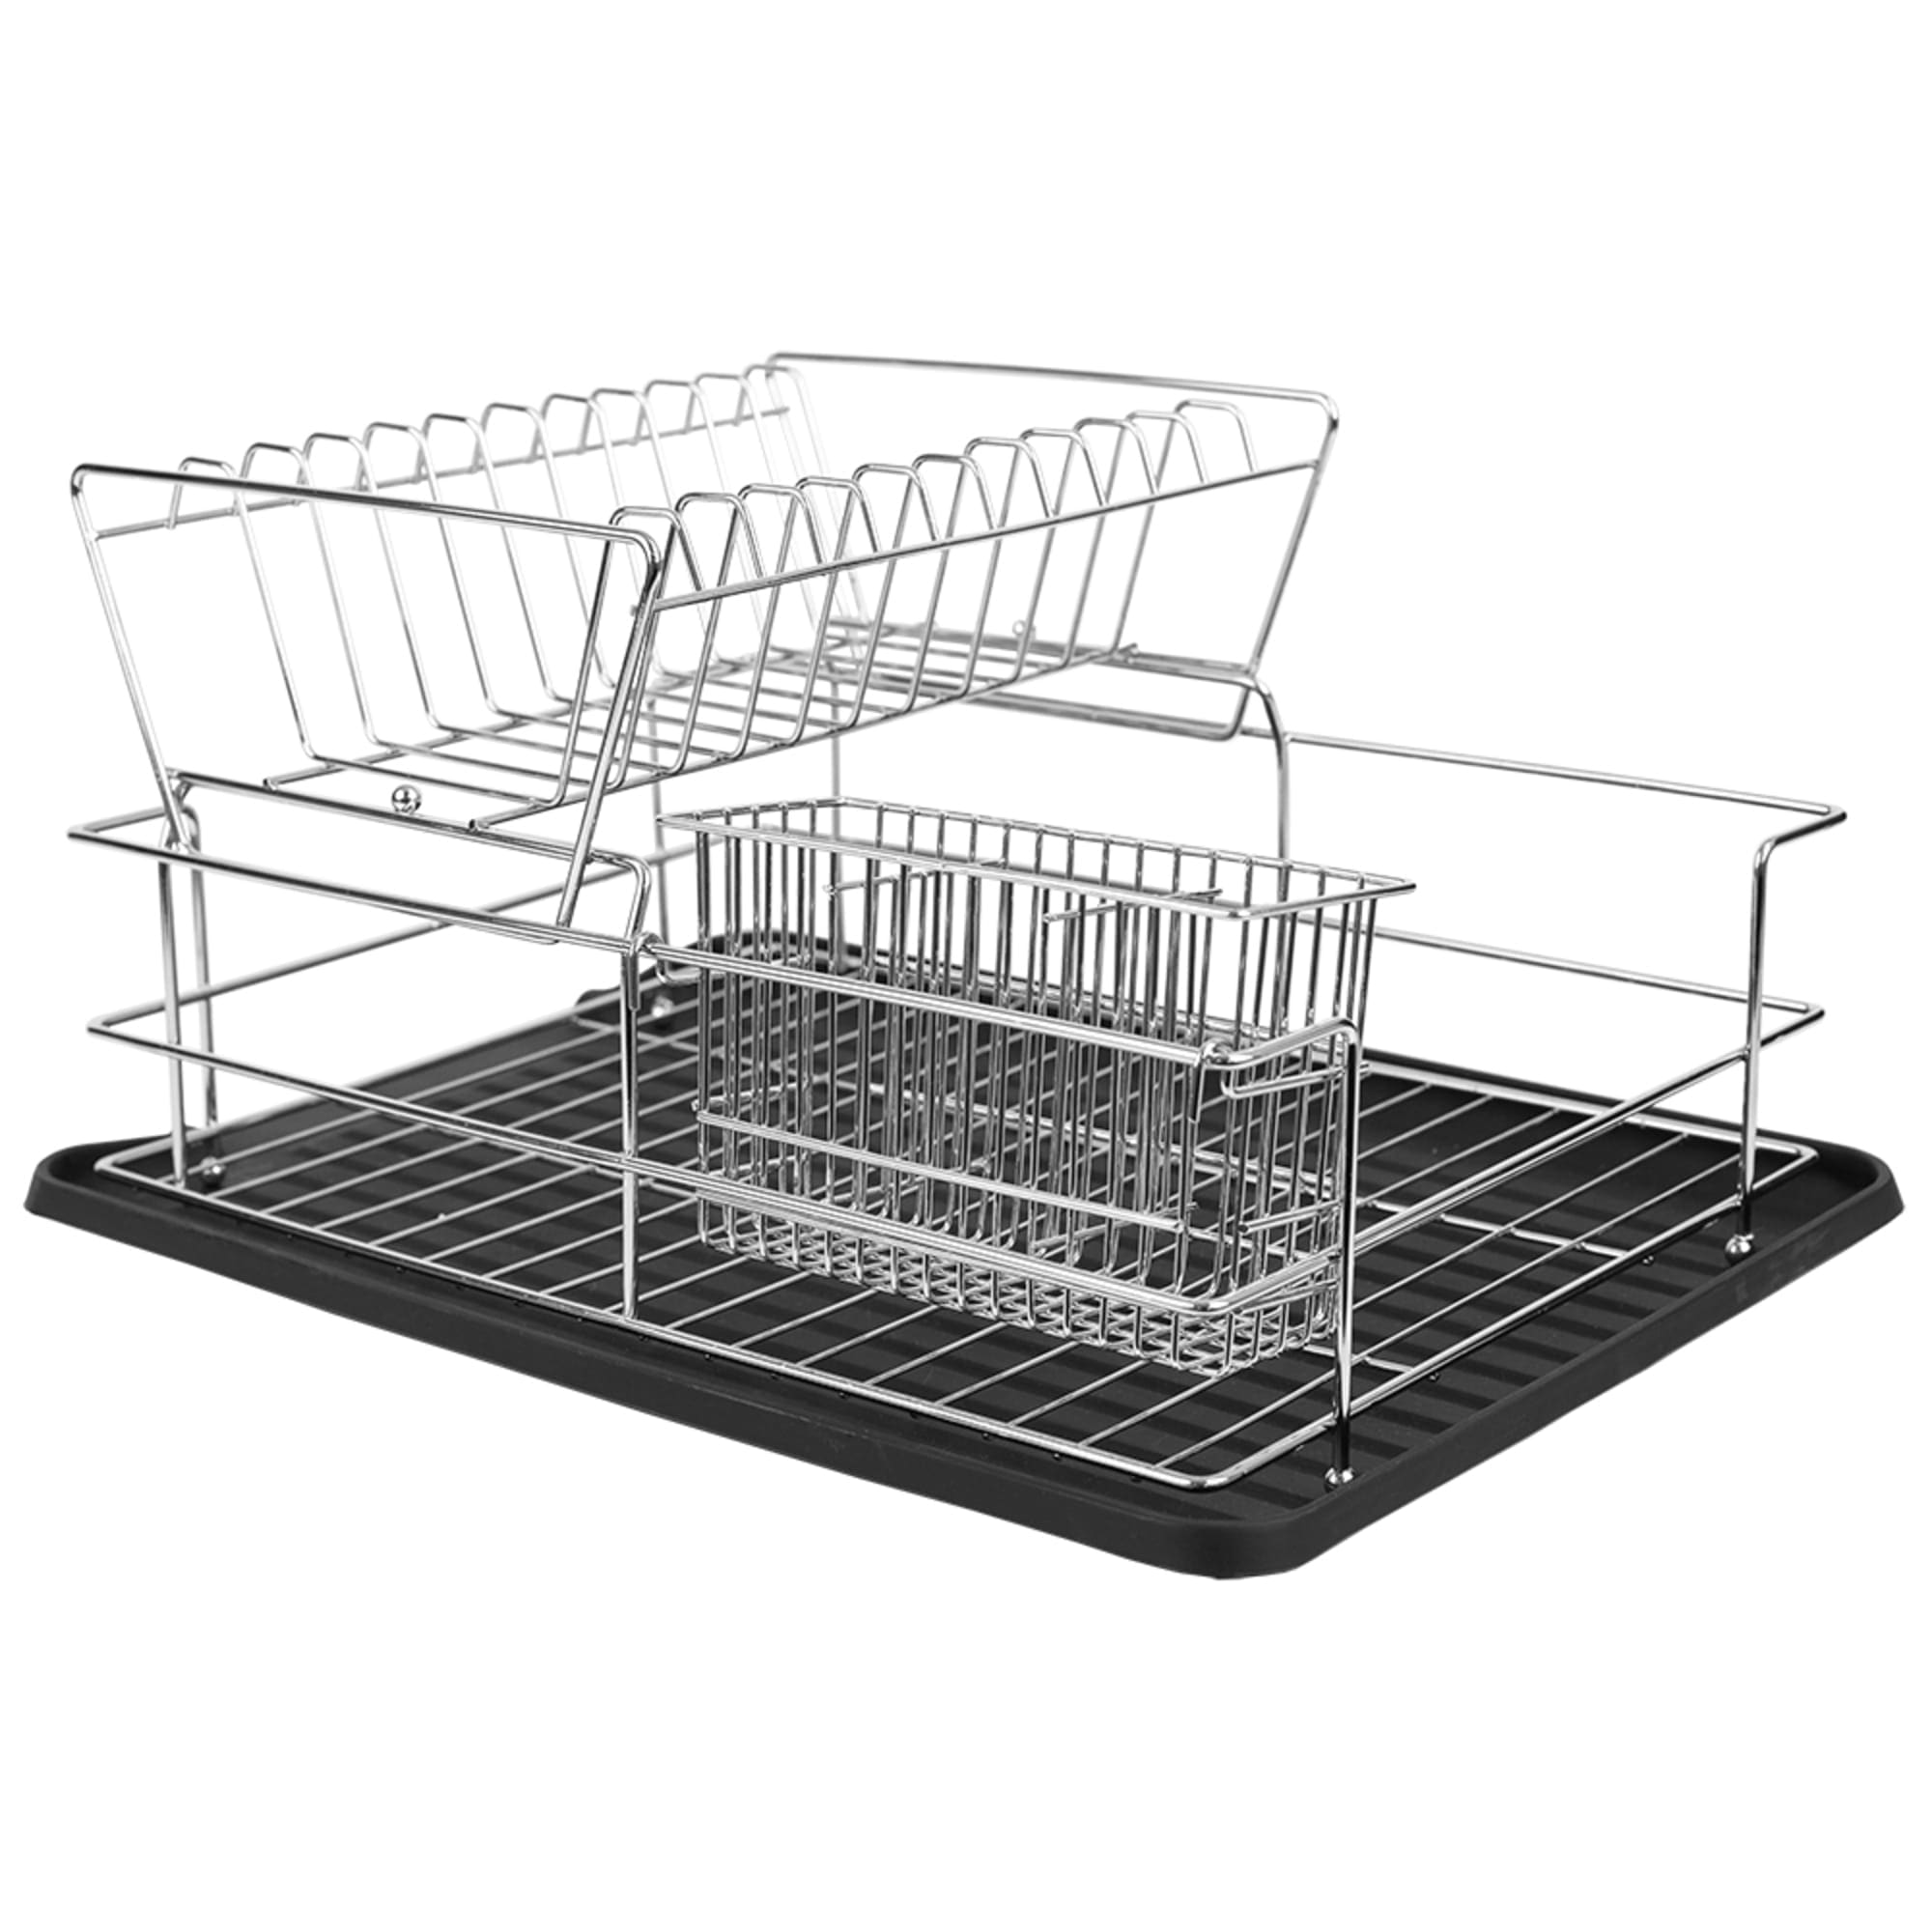 Extra Large 2-Tier Stainless Steel Dish Drying Rack - Rustproof